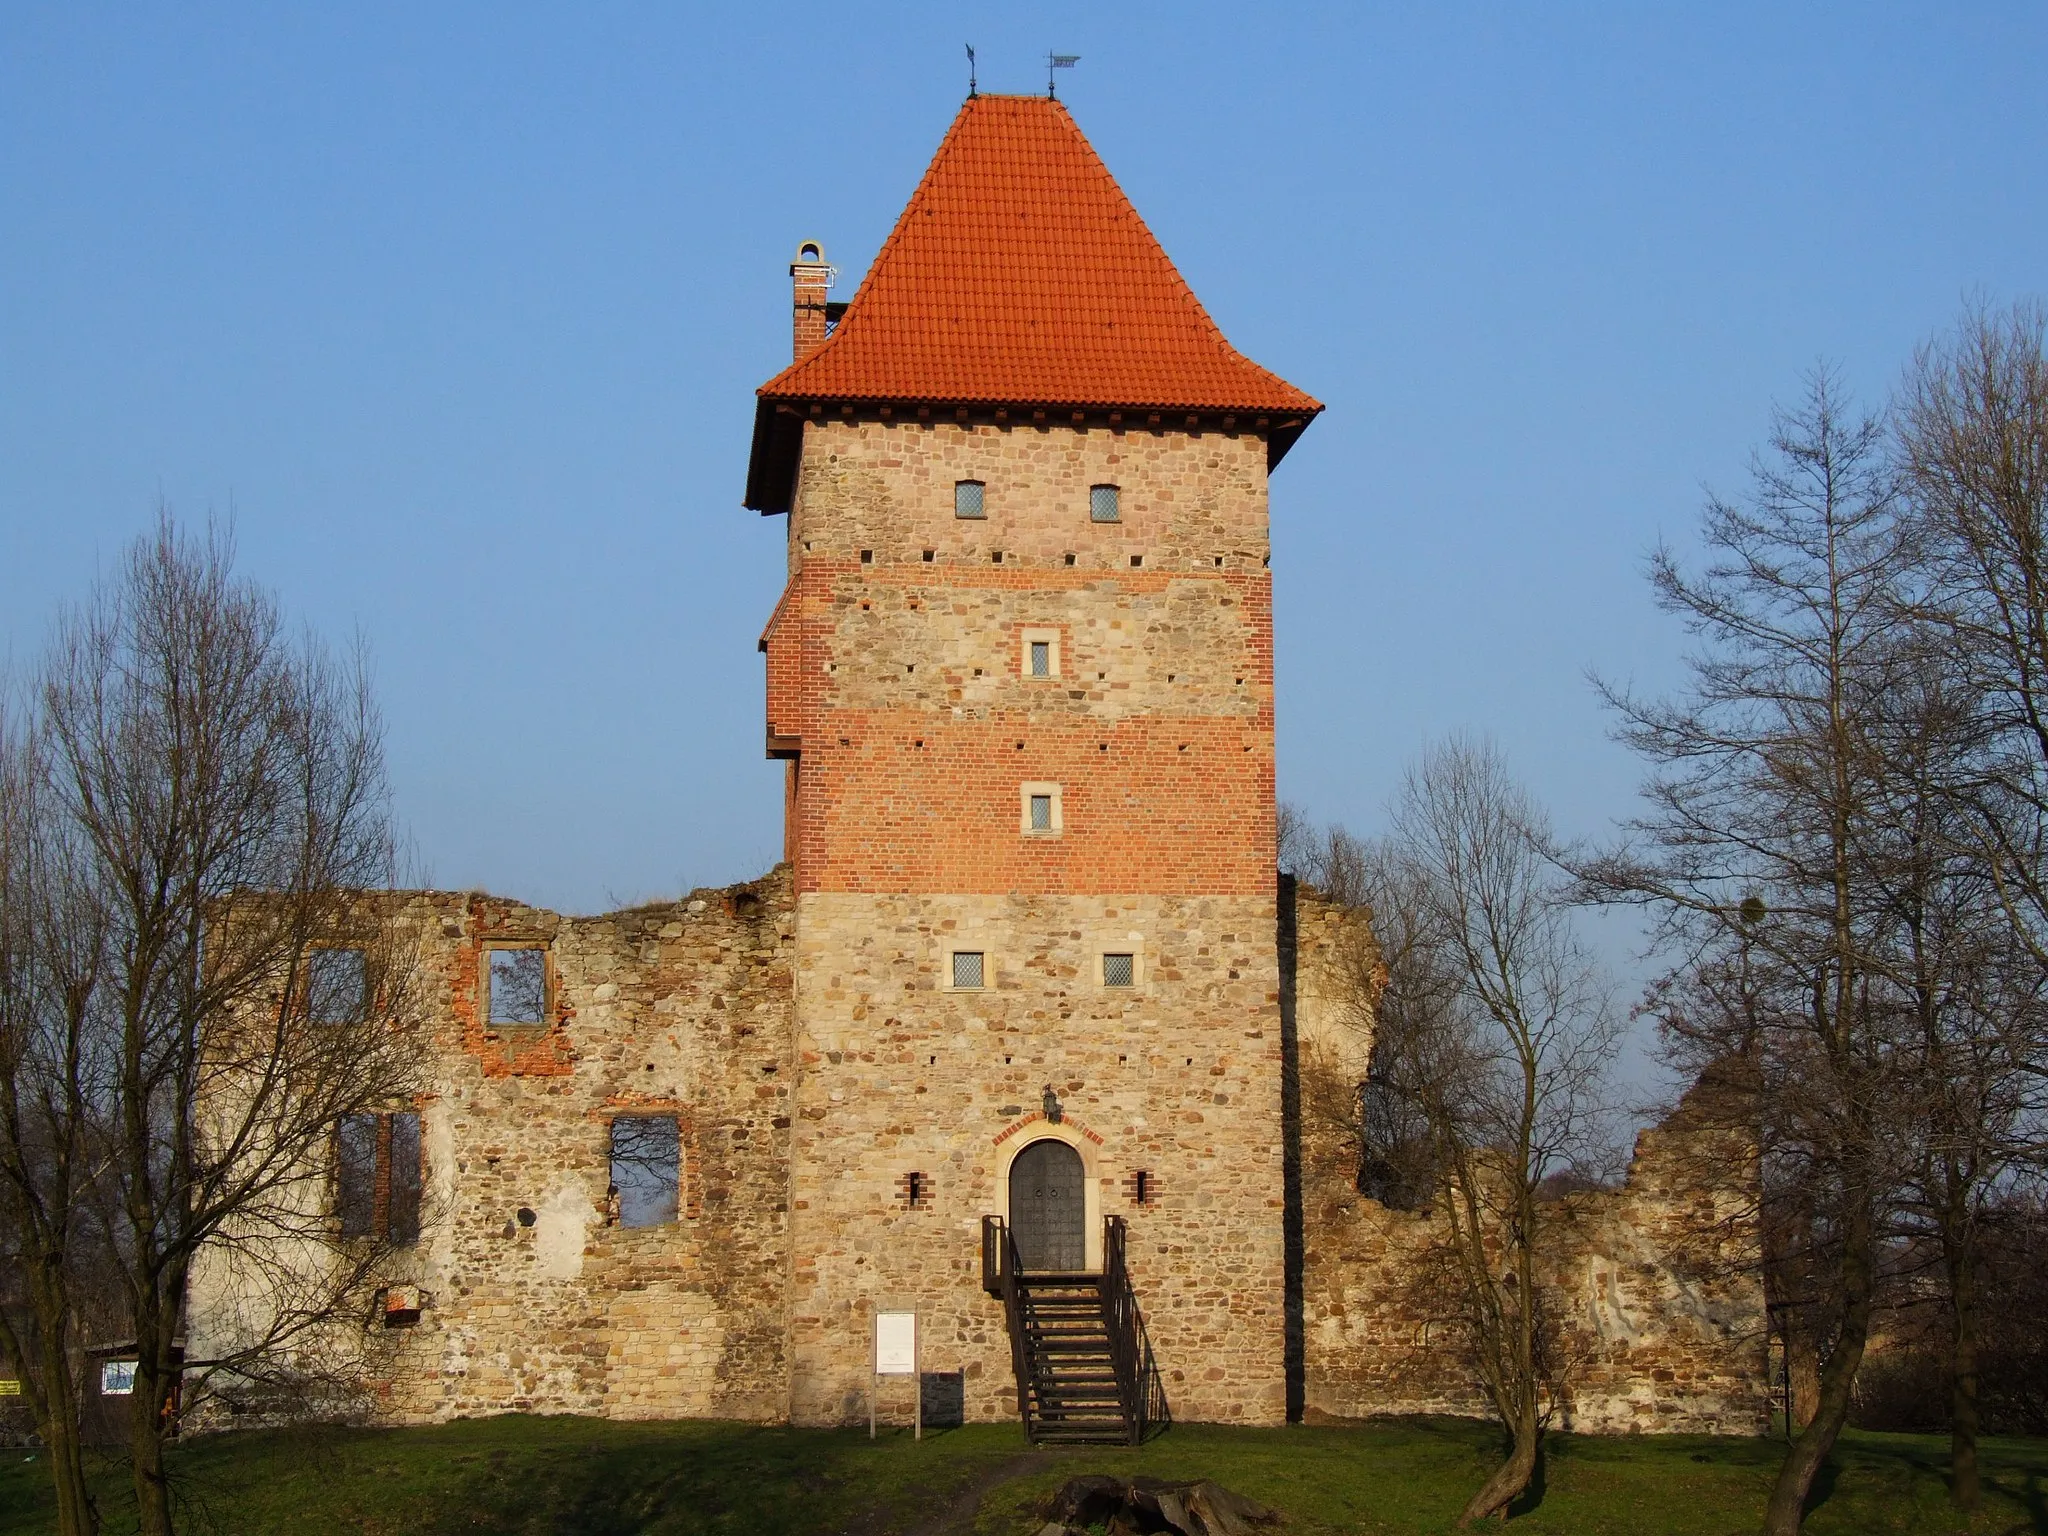 Photo showing: Chudów (Chudow, also Chutow) Castle, near Gliwice (Gleiwitz), Upper Silesia: built 1532 by and former residence of the Roman-German Silesian nobility House of Saszowski (historically also spelled Saschowsky, Sassowski, Szaszowski, Schaschowsky and Schaszowsky) of Saszow, Geraltowitz and Palczowitz; including its branch/descendants alias Geraltowsky (Gierałtowski) and Palczowski (Palczewski). Members of the House were also for a long period of time Burgraves of Kraków (former capital of Poland), as well as progenitor of the Saszor / Orla (Eagle) clan arms of the Kingdom of Poland.